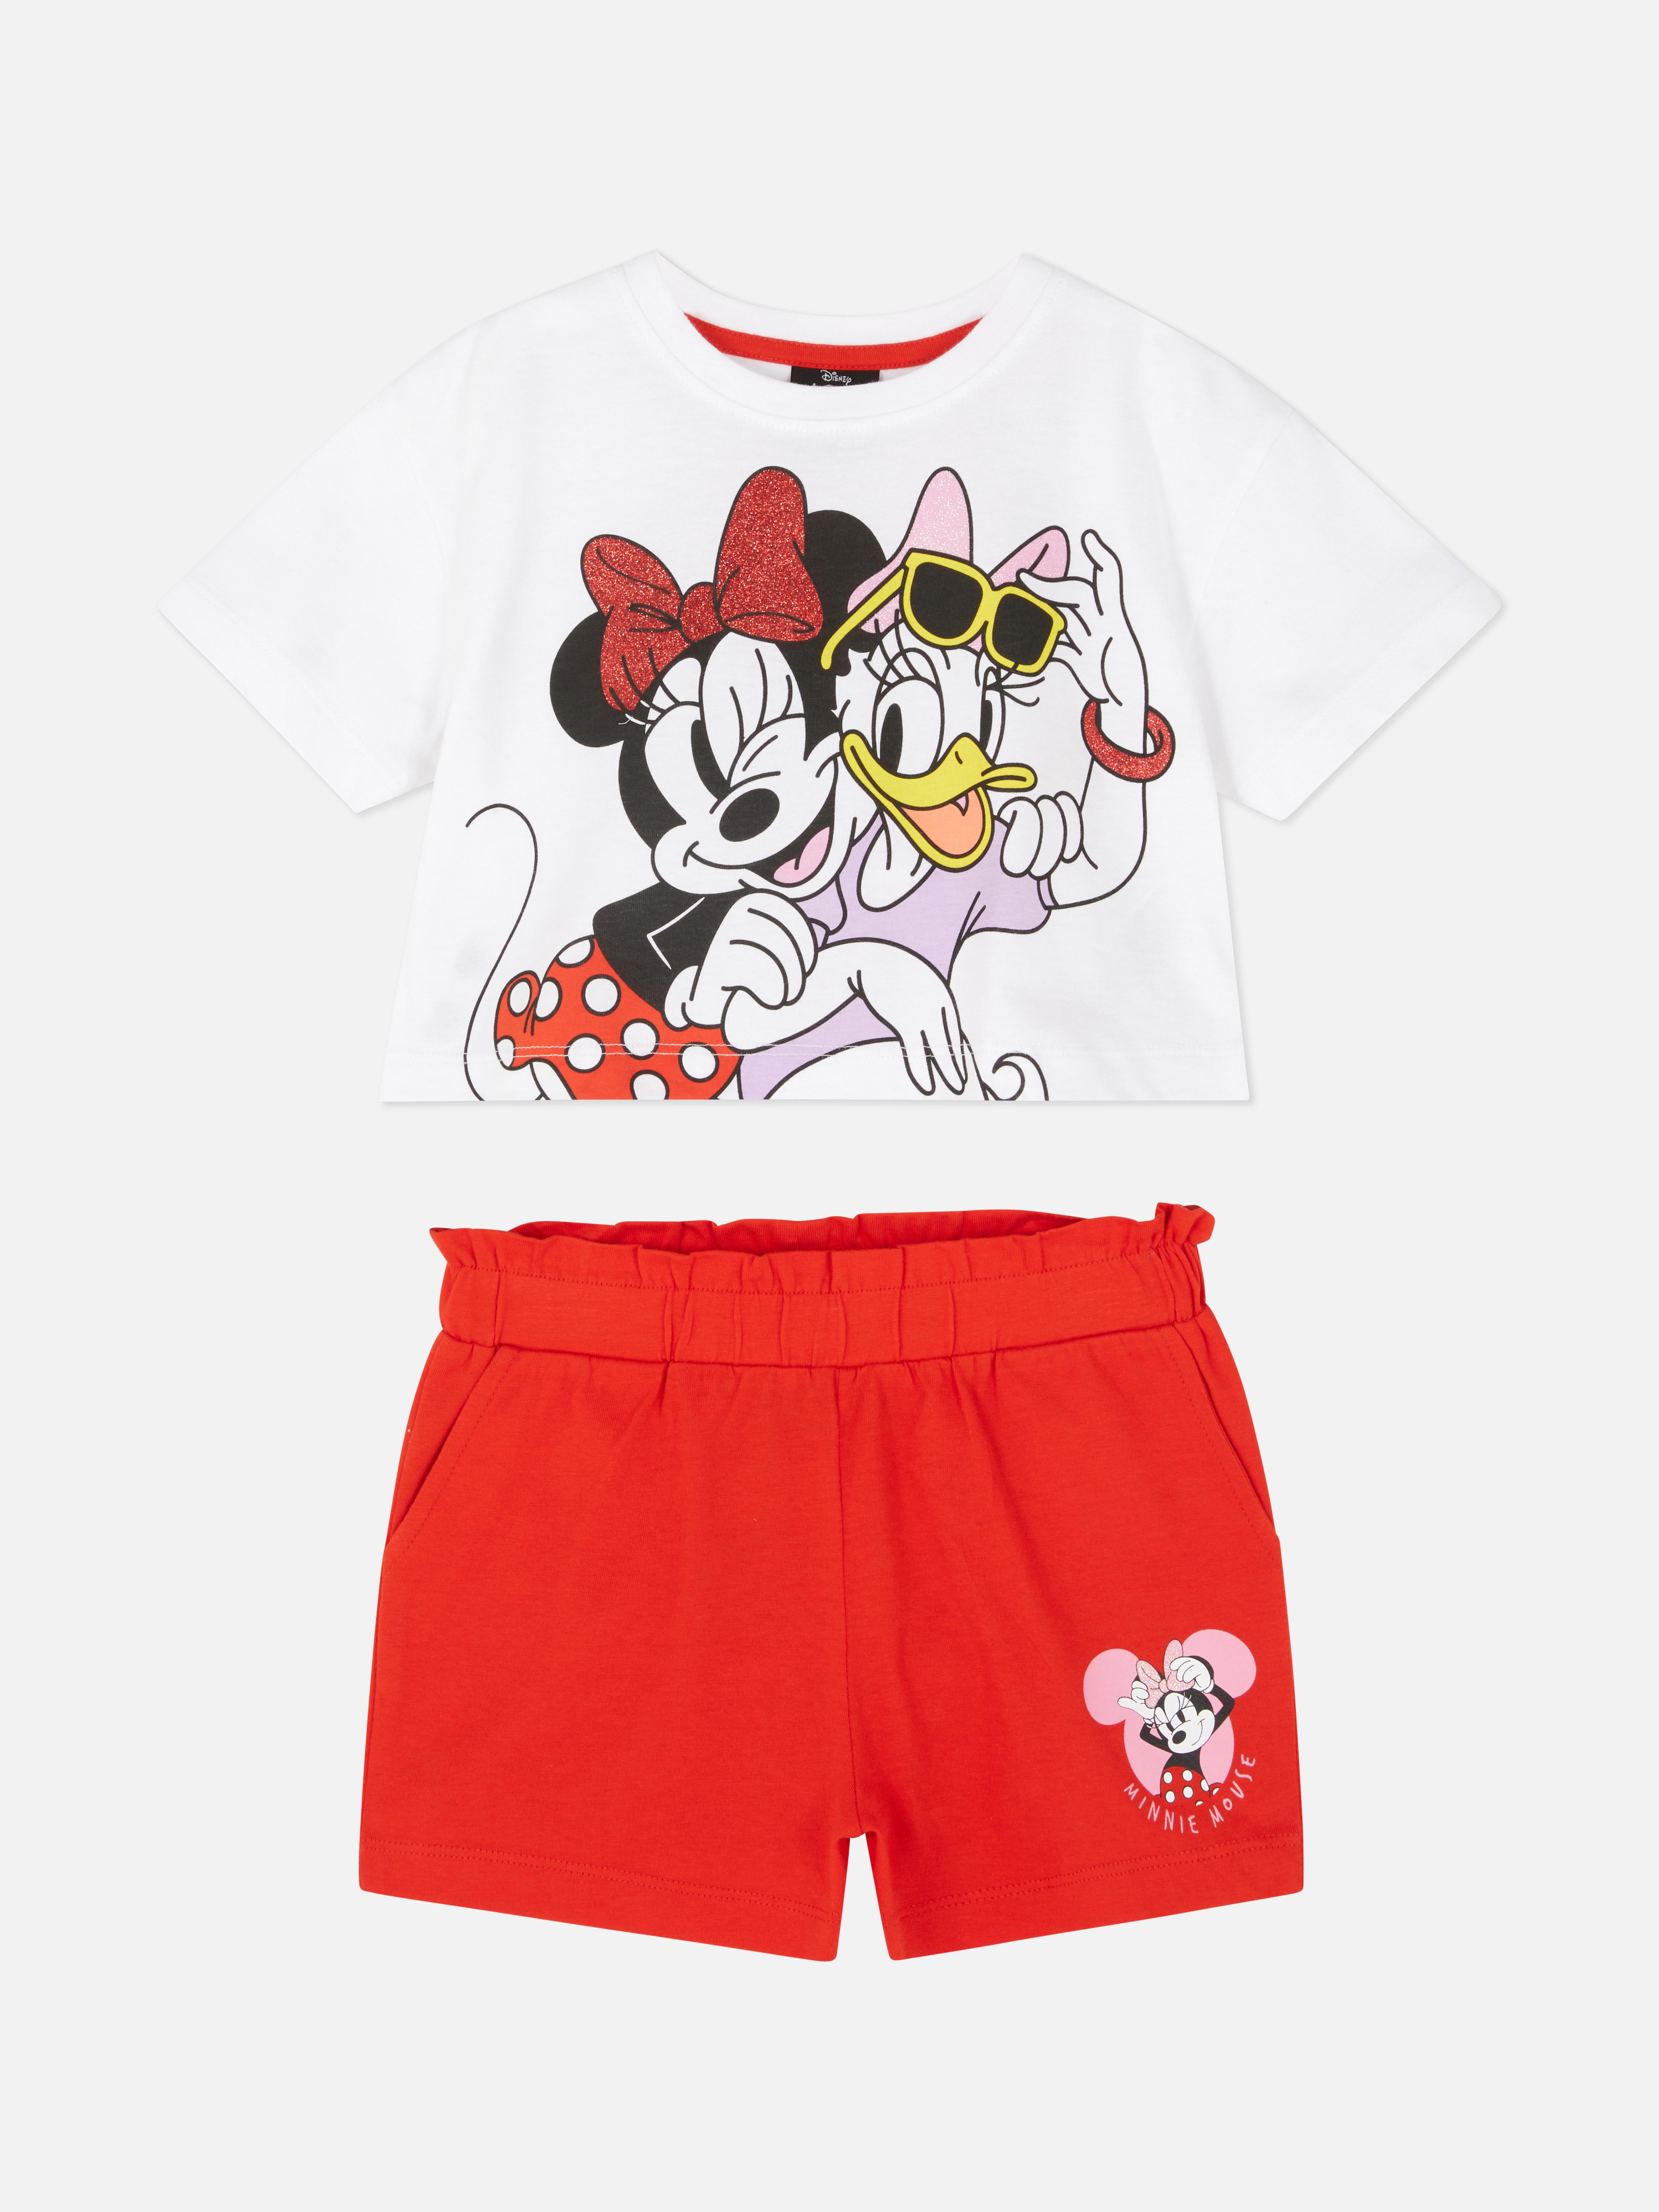 Disney’s Minnie Mouse and Daisy Duck Top and Shorts Set